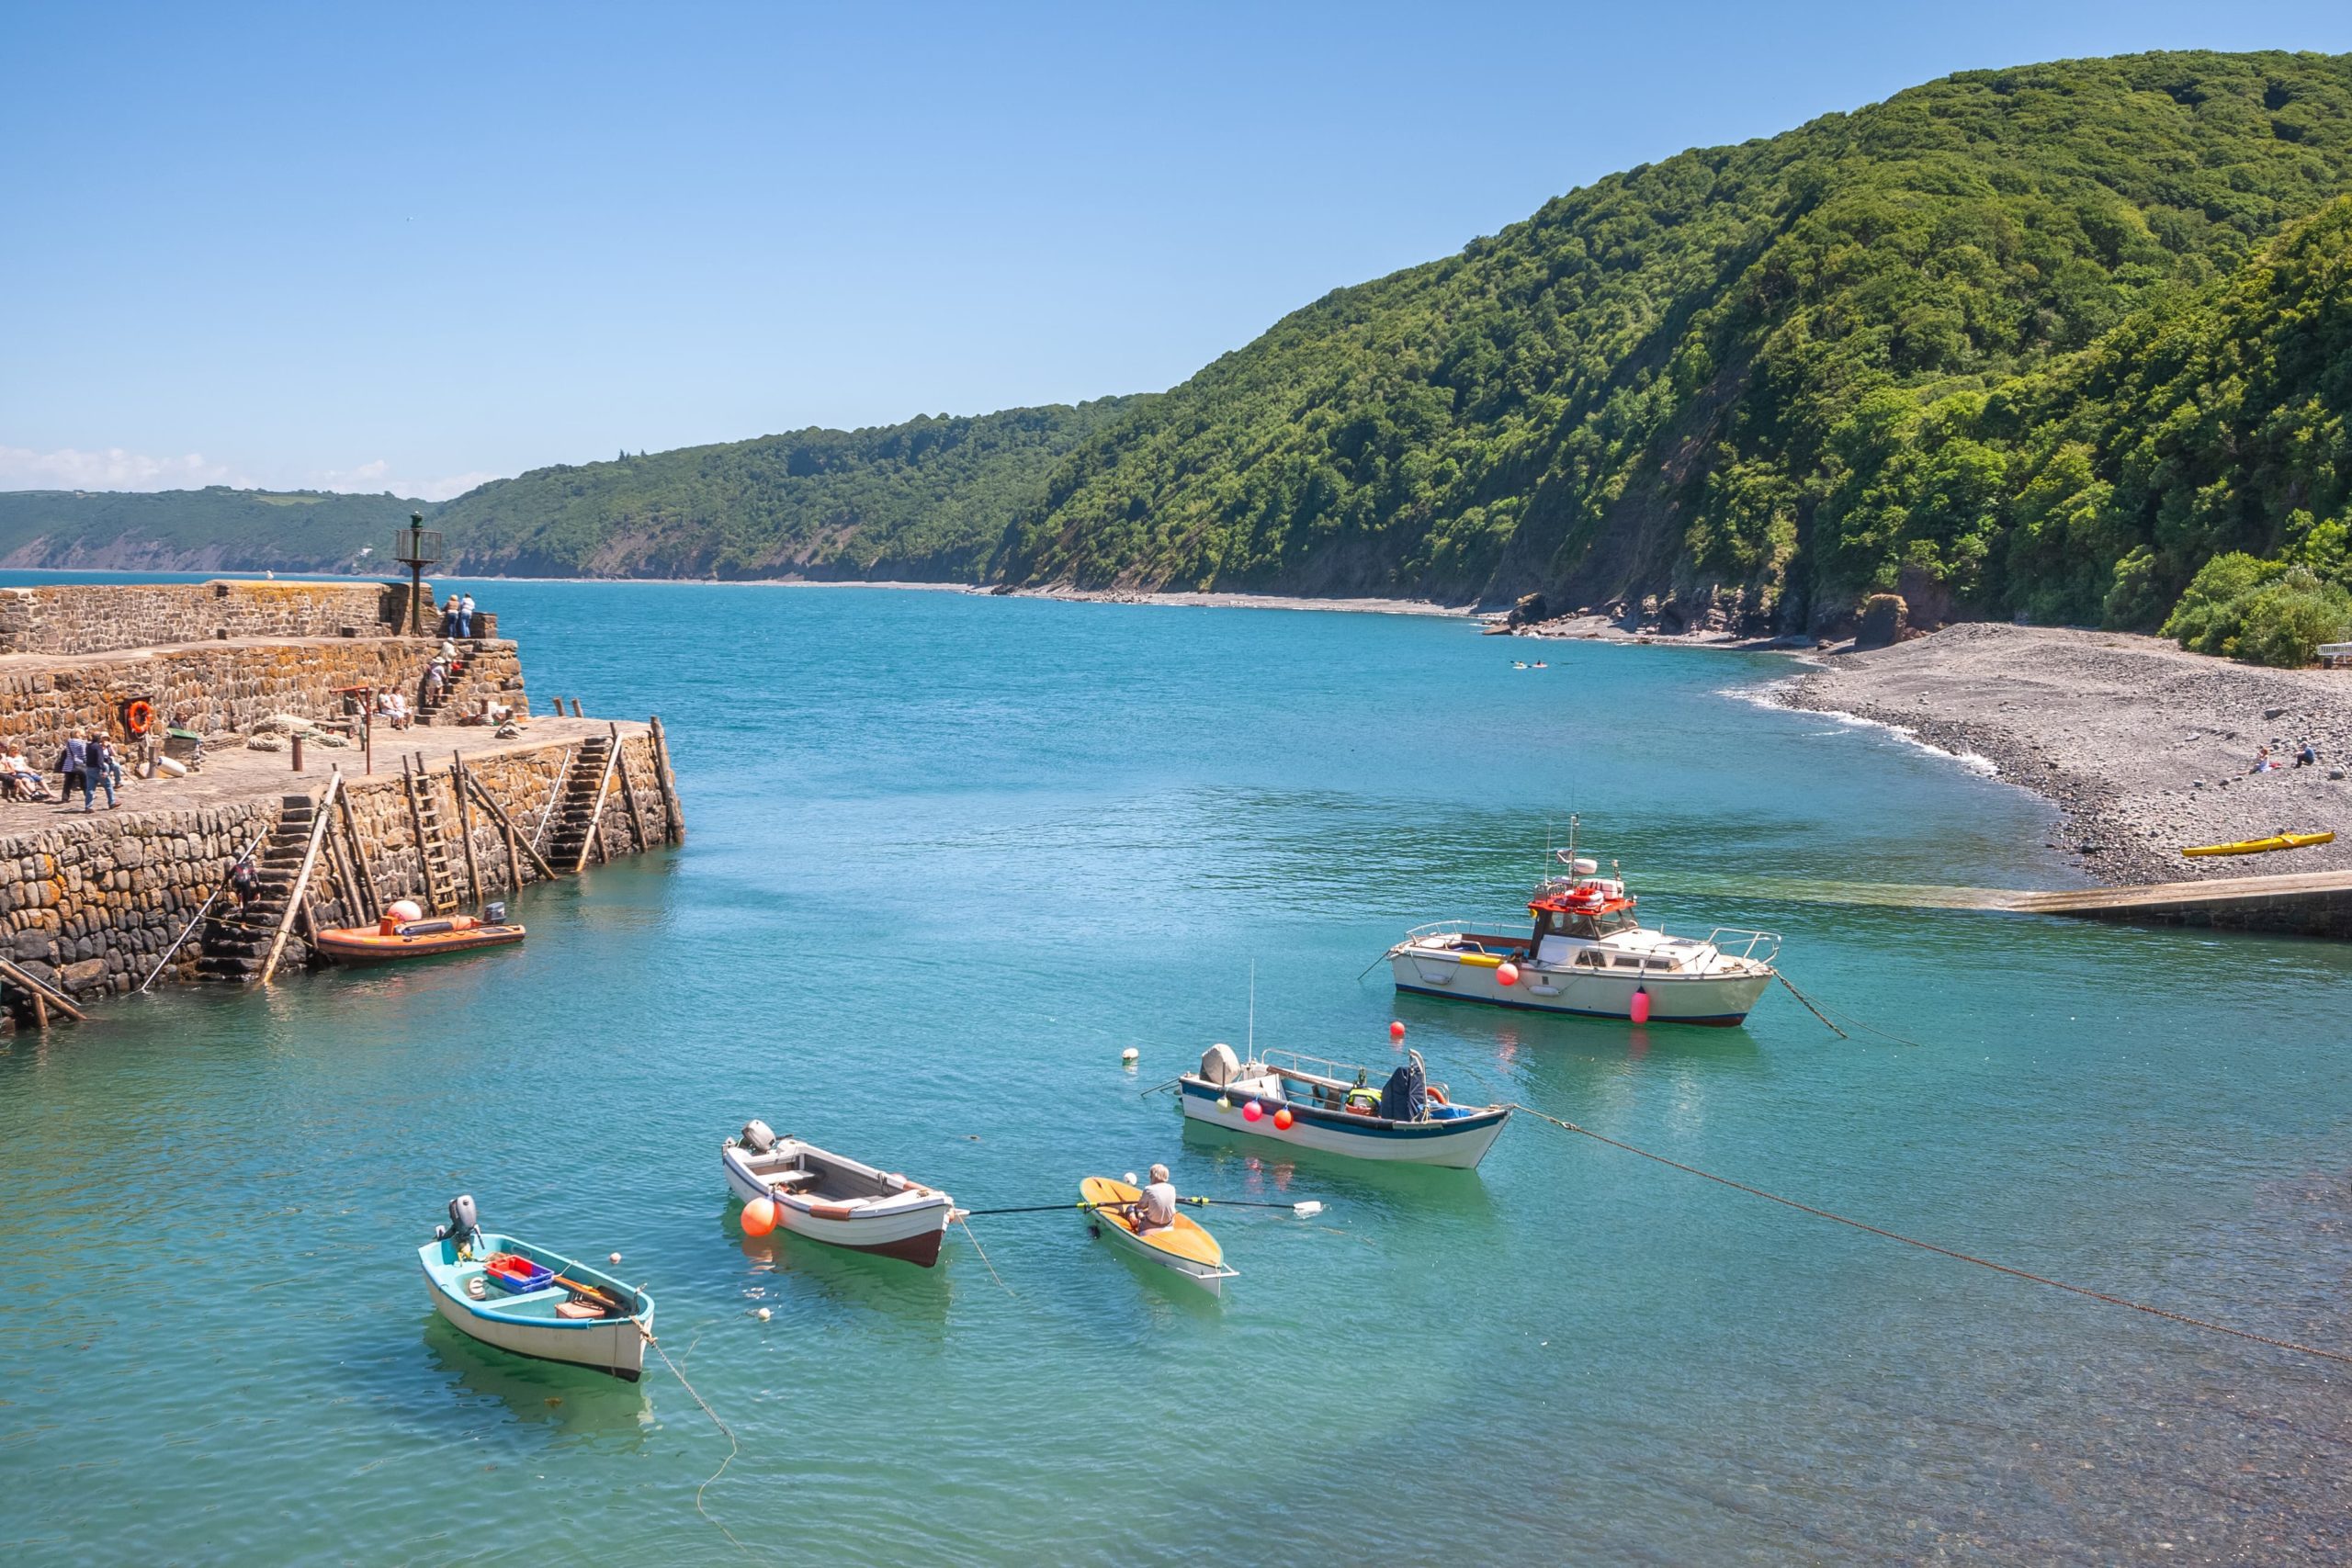 Clovelly named ‘beautiful seaside village’ by The Mirror